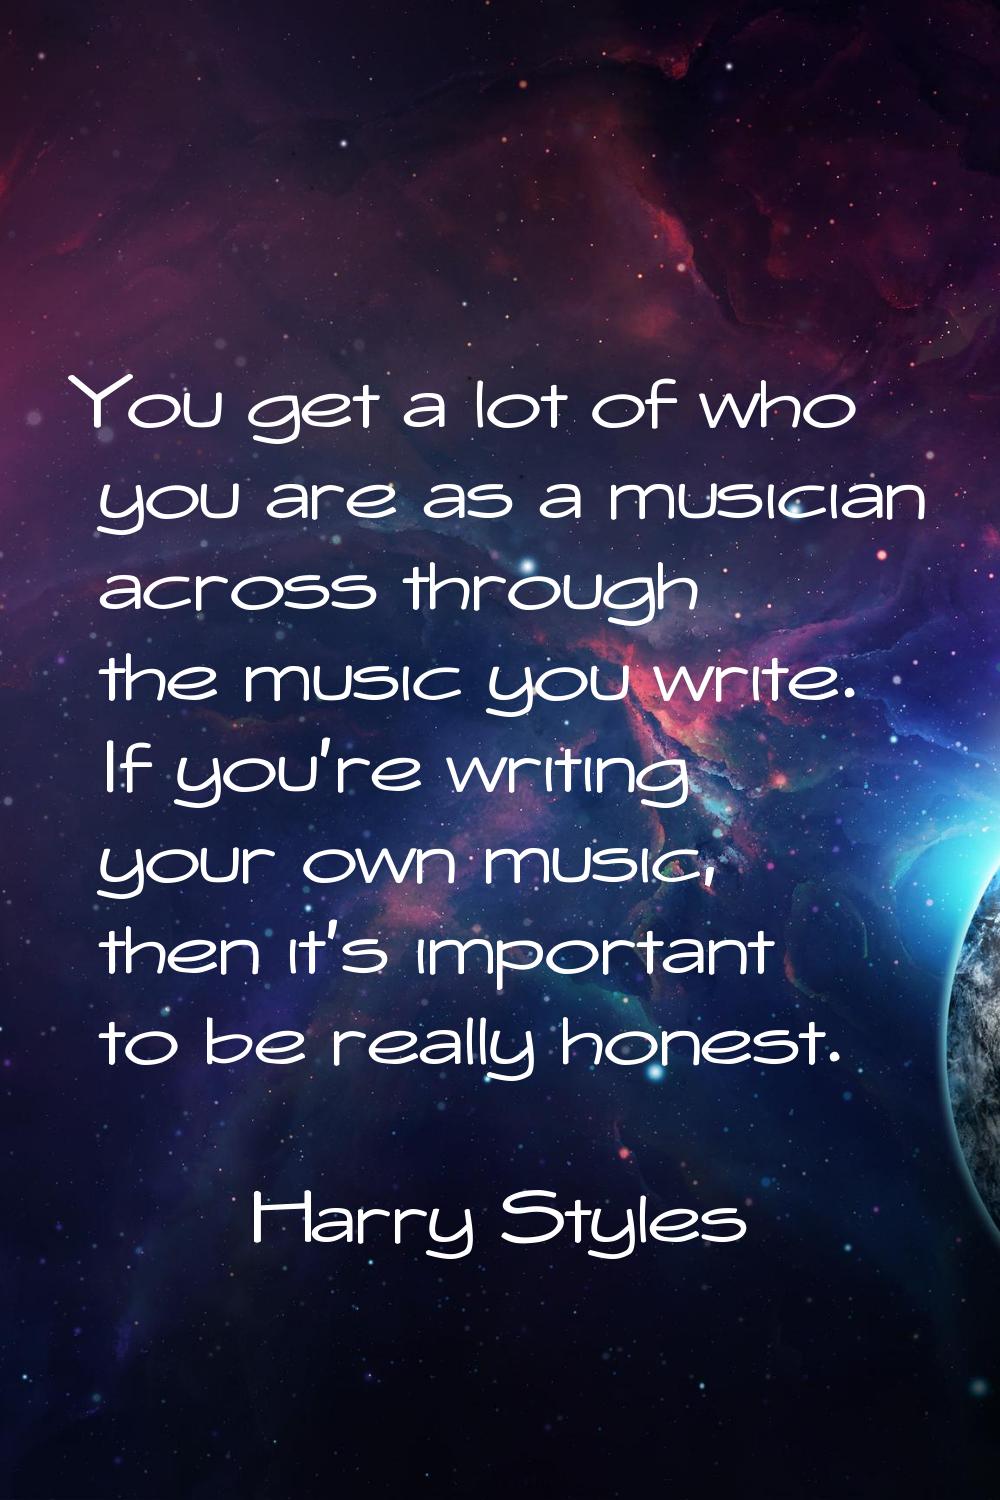 You get a lot of who you are as a musician across through the music you write. If you're writing yo